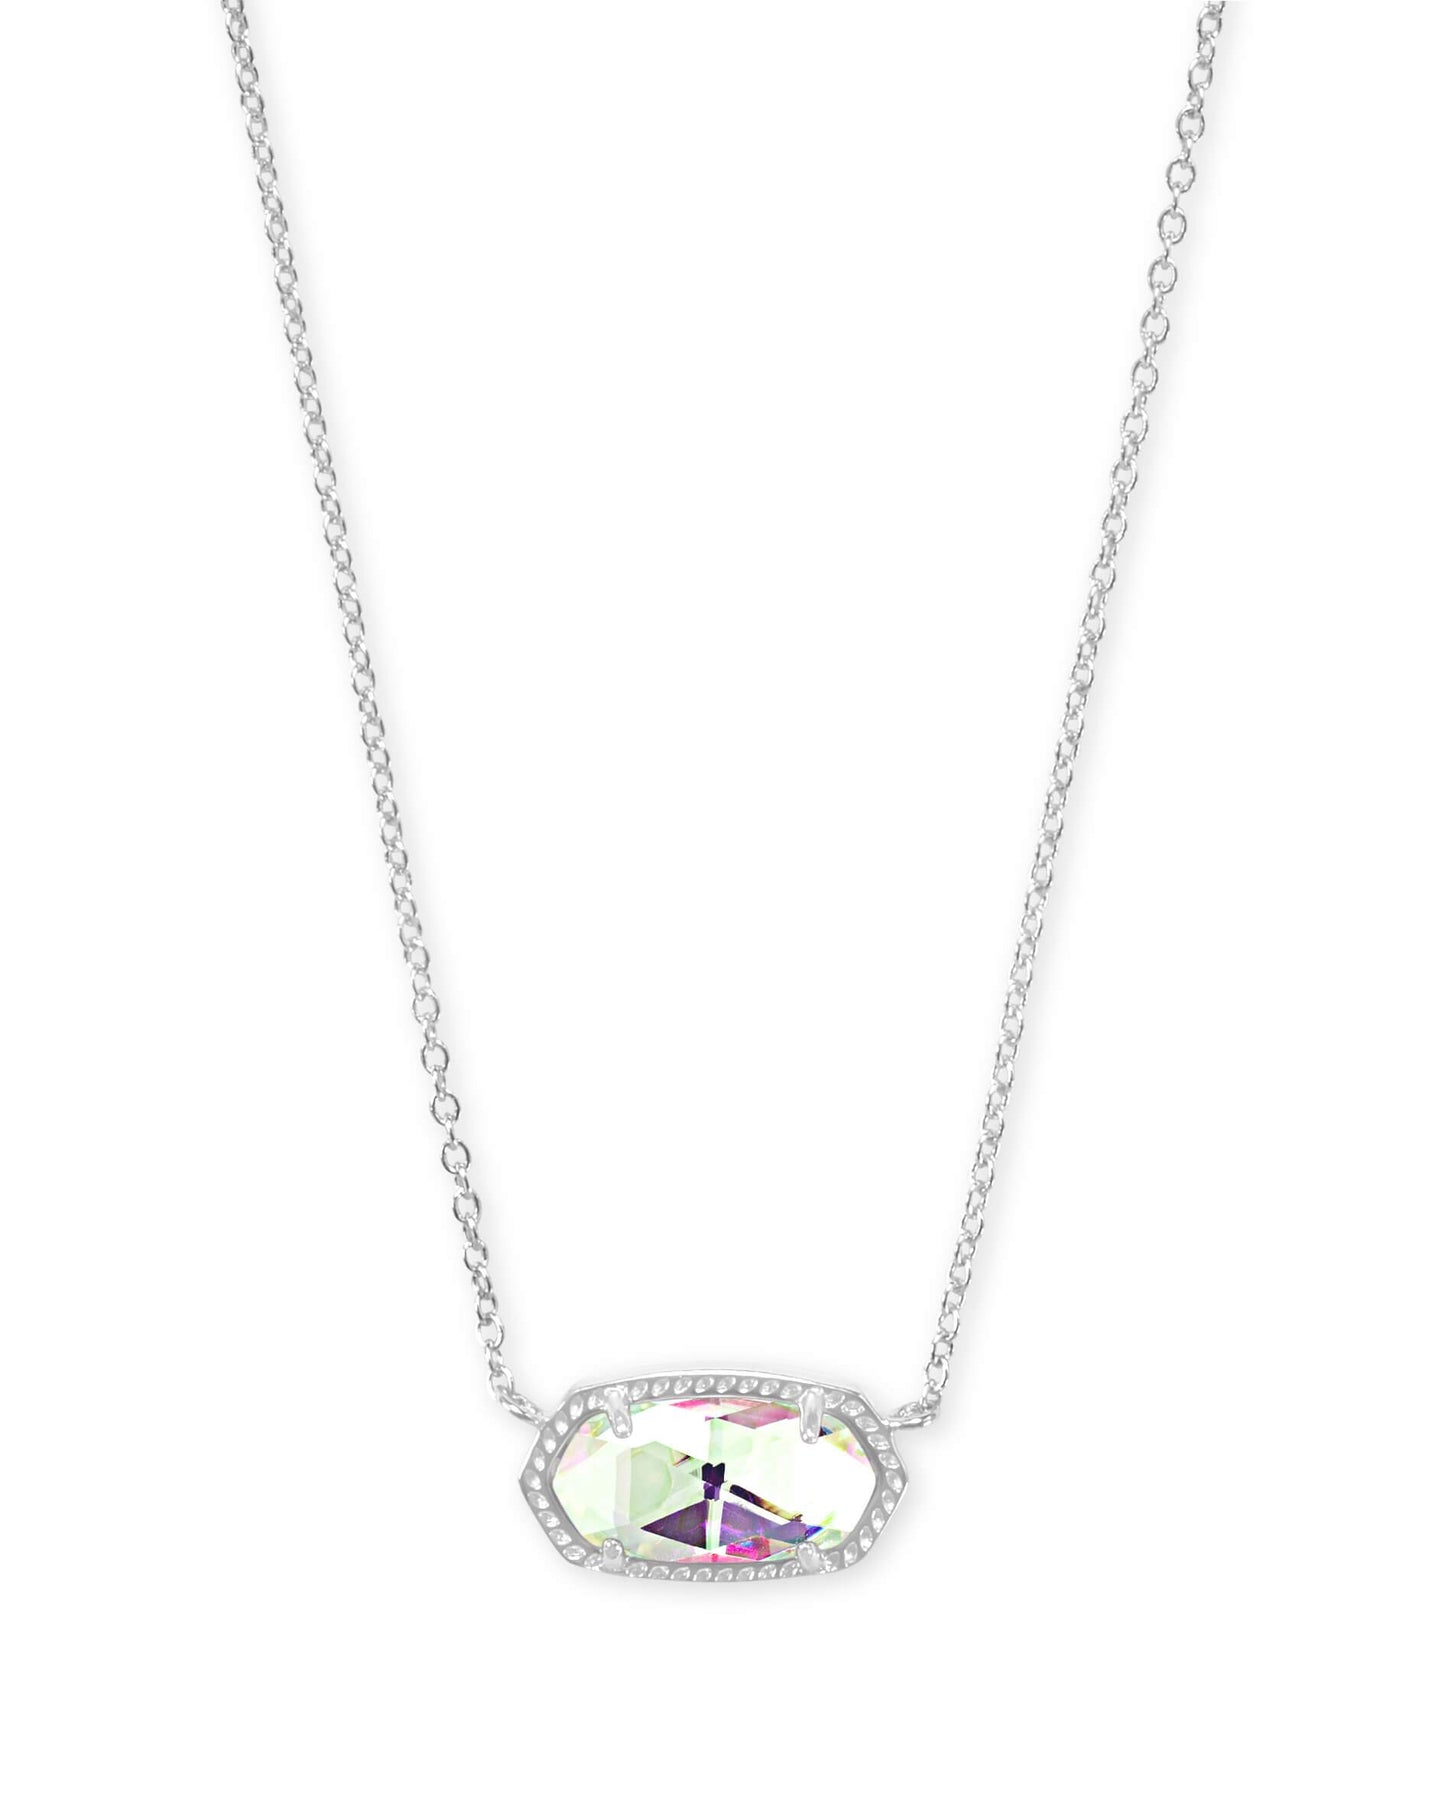 Load image into Gallery viewer, Kendra Scott, Elisa Necklace, 842177167540 N5067RHD, 0.63&amp;#39;L x 0.38&amp;#39;W stationary pendant, 15&amp;#39; chain with 2&amp;#39; extender, RHODIUM DICHROIC GLASS
